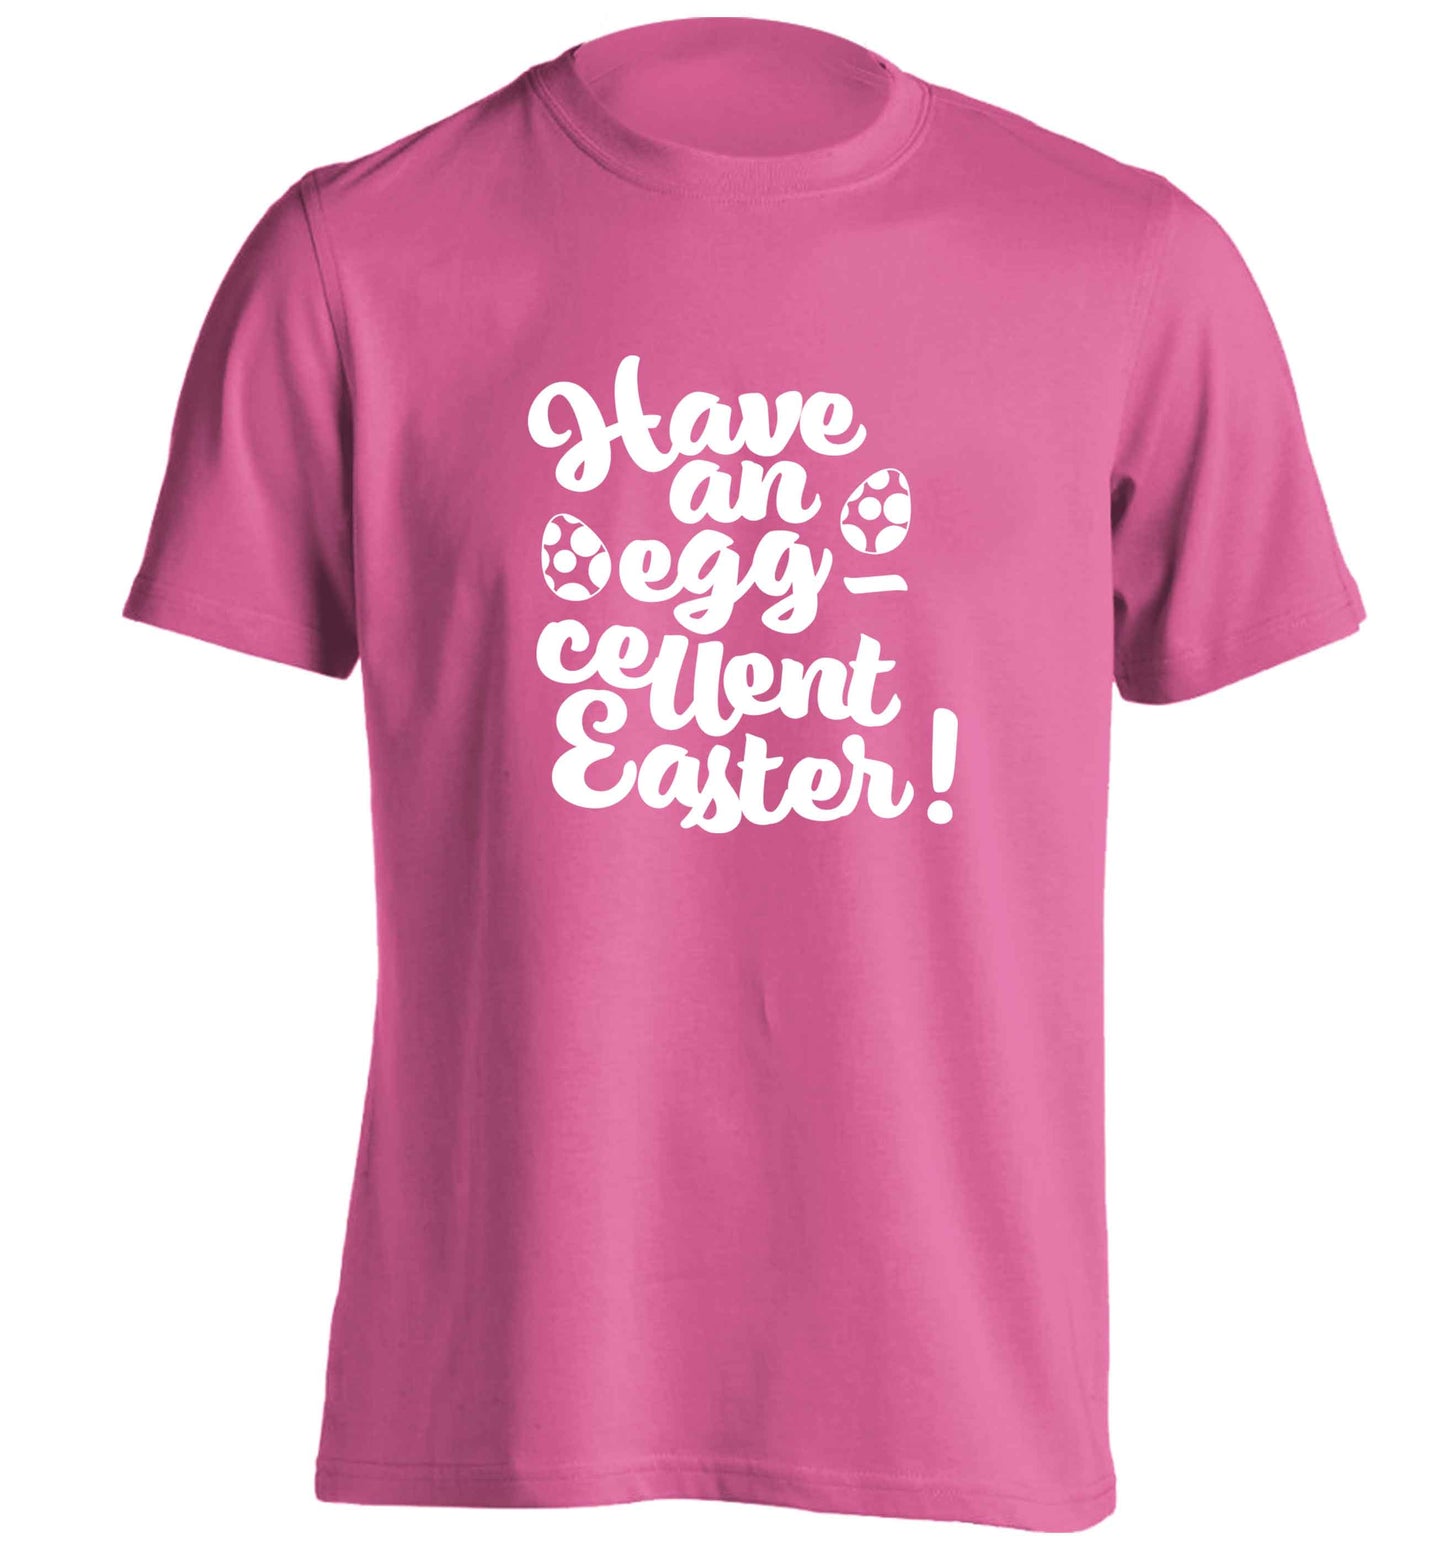 Have an eggcellent Easter adults unisex pink Tshirt 2XL